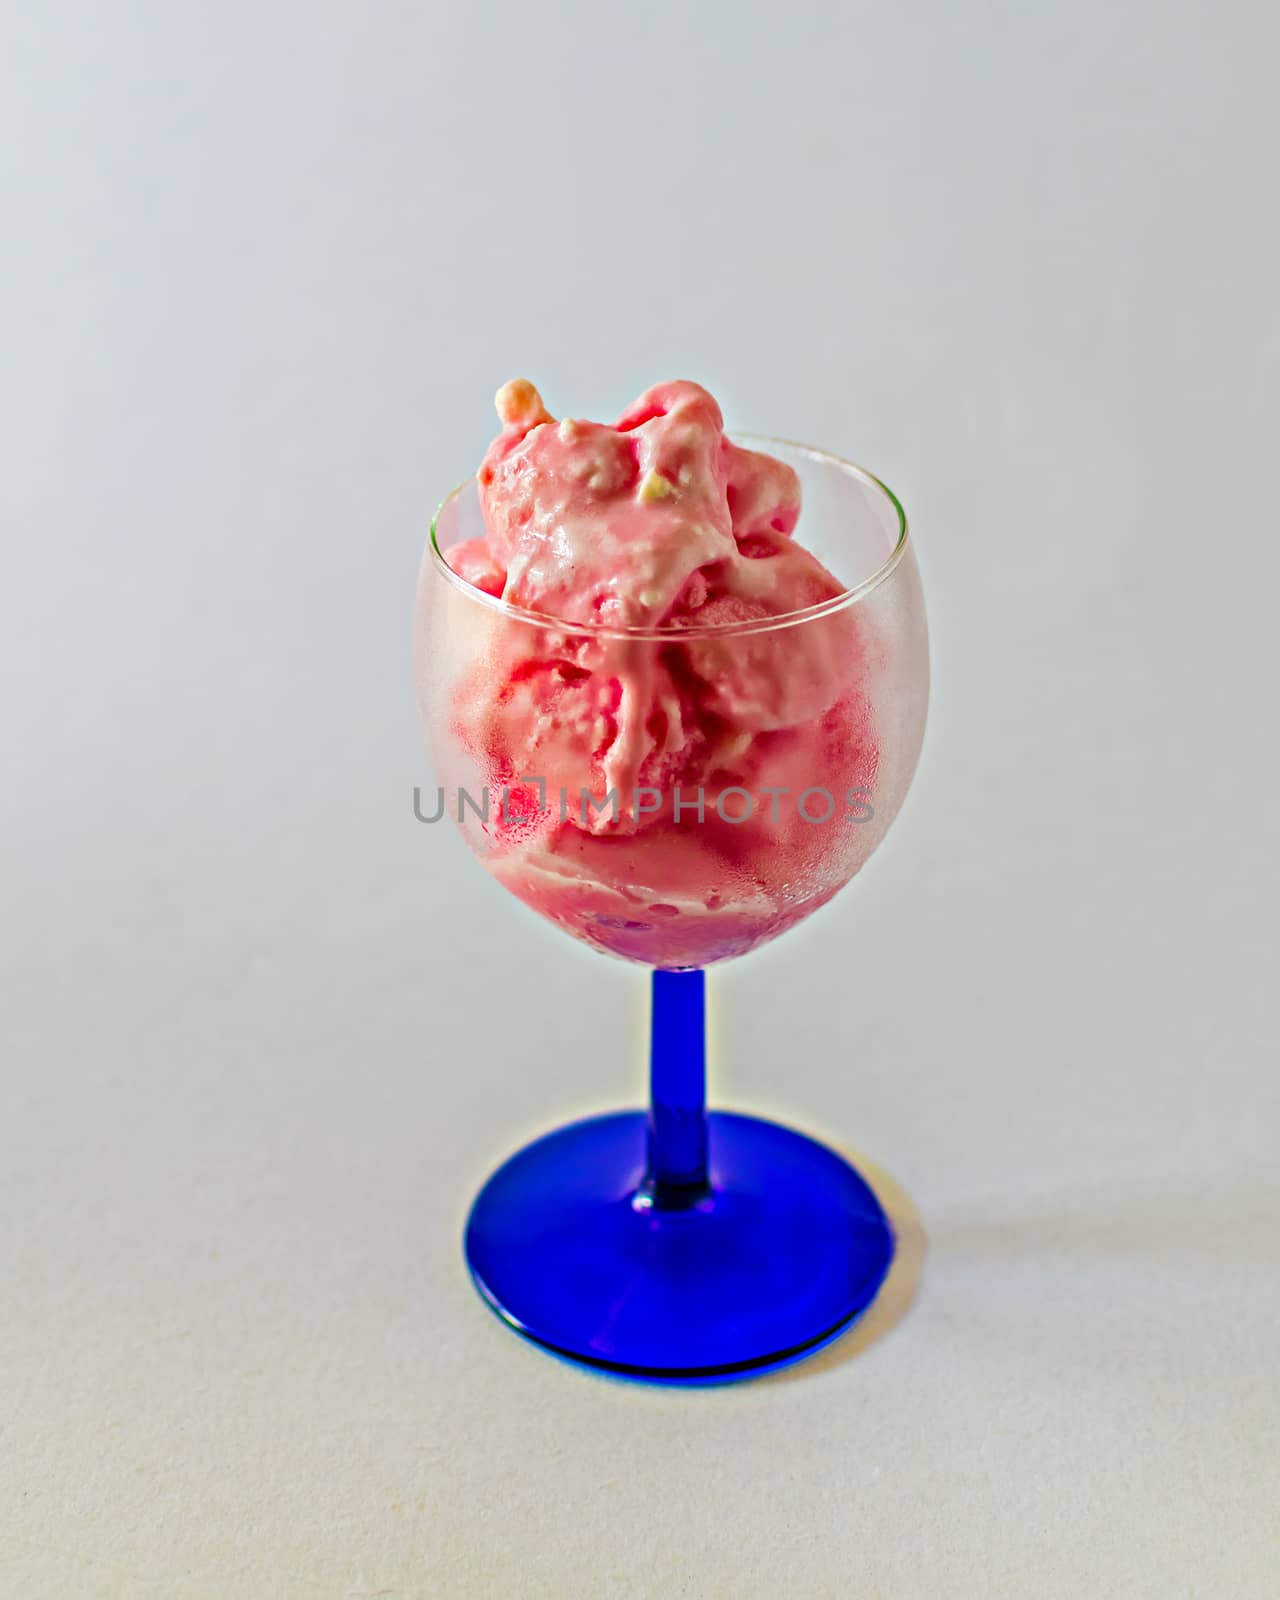 Delicious, pink strawberry ice-cream in a transparent wine glass. by lalam